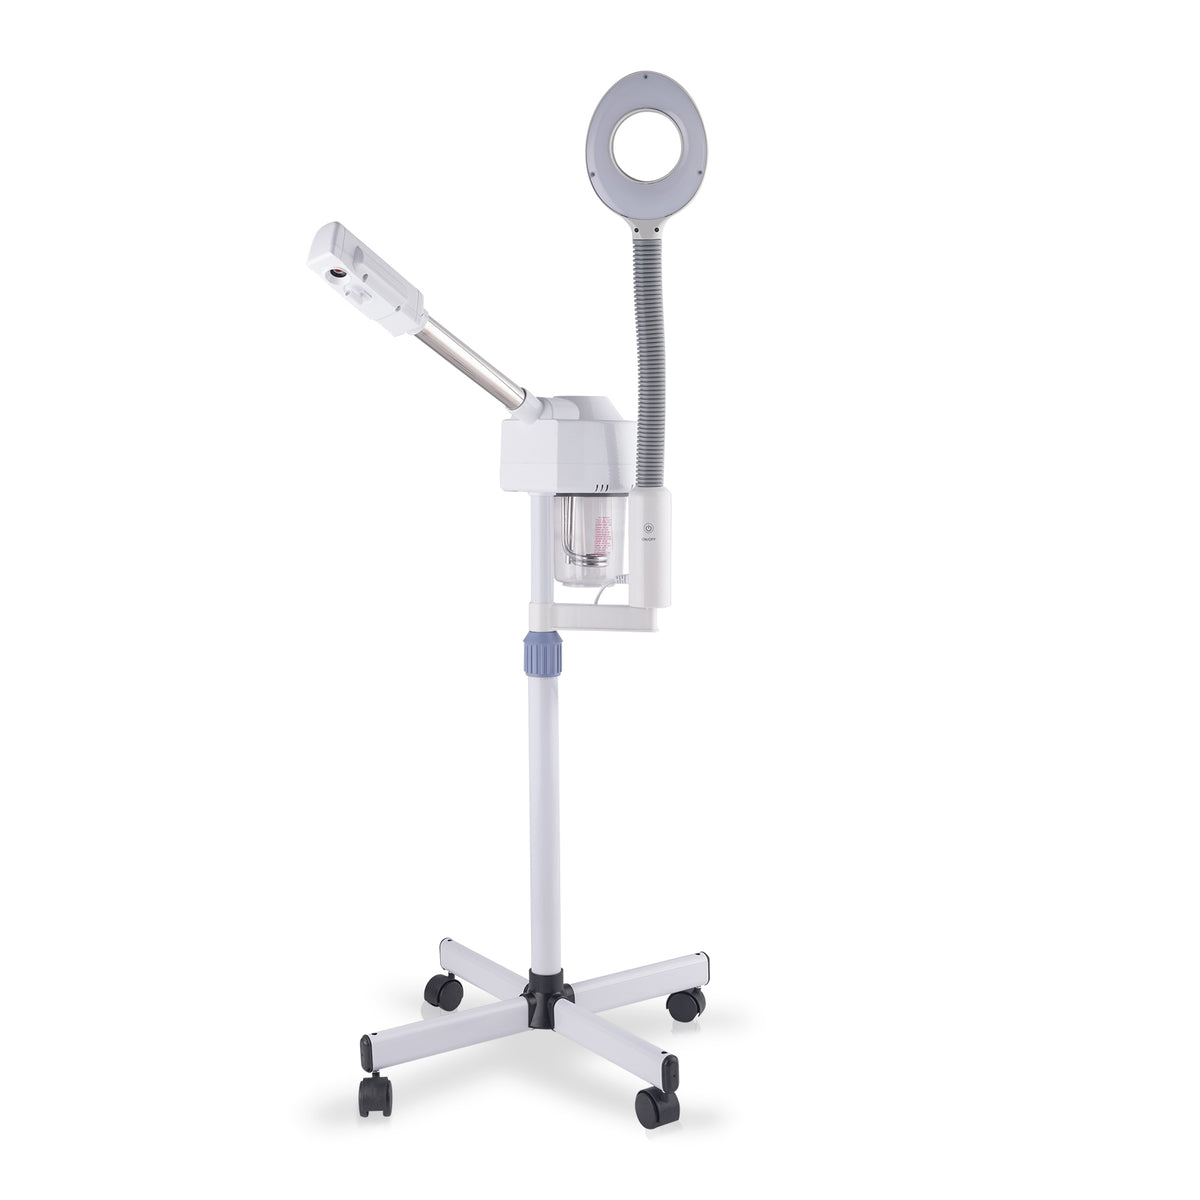 OmySalon 2 in 1 Professional Touch Screen Facial Steamer with 3X Magnifying Lamp